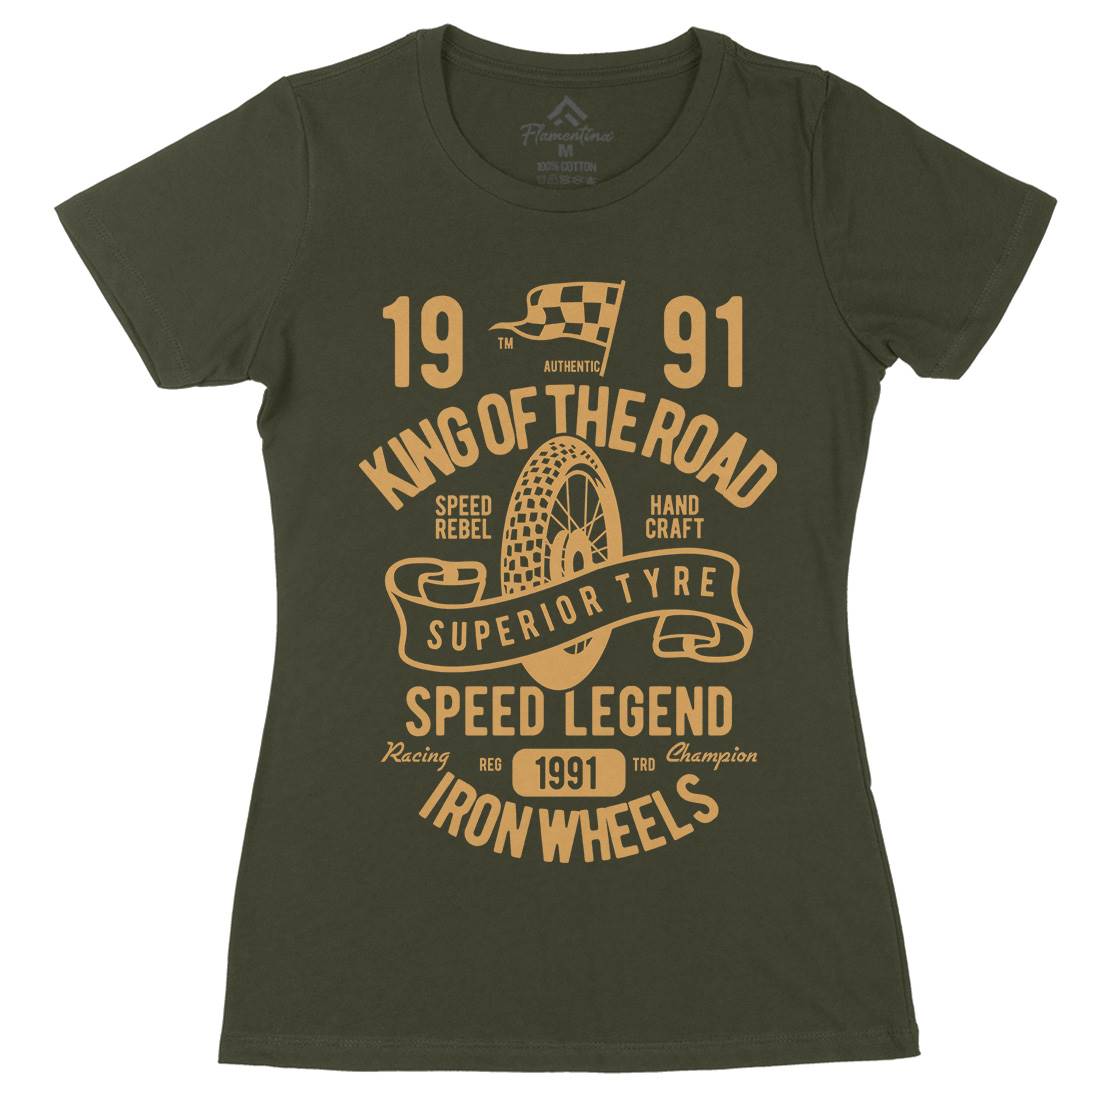 Superior Tyre King Of The Road Womens Organic Crew Neck T-Shirt Motorcycles B458